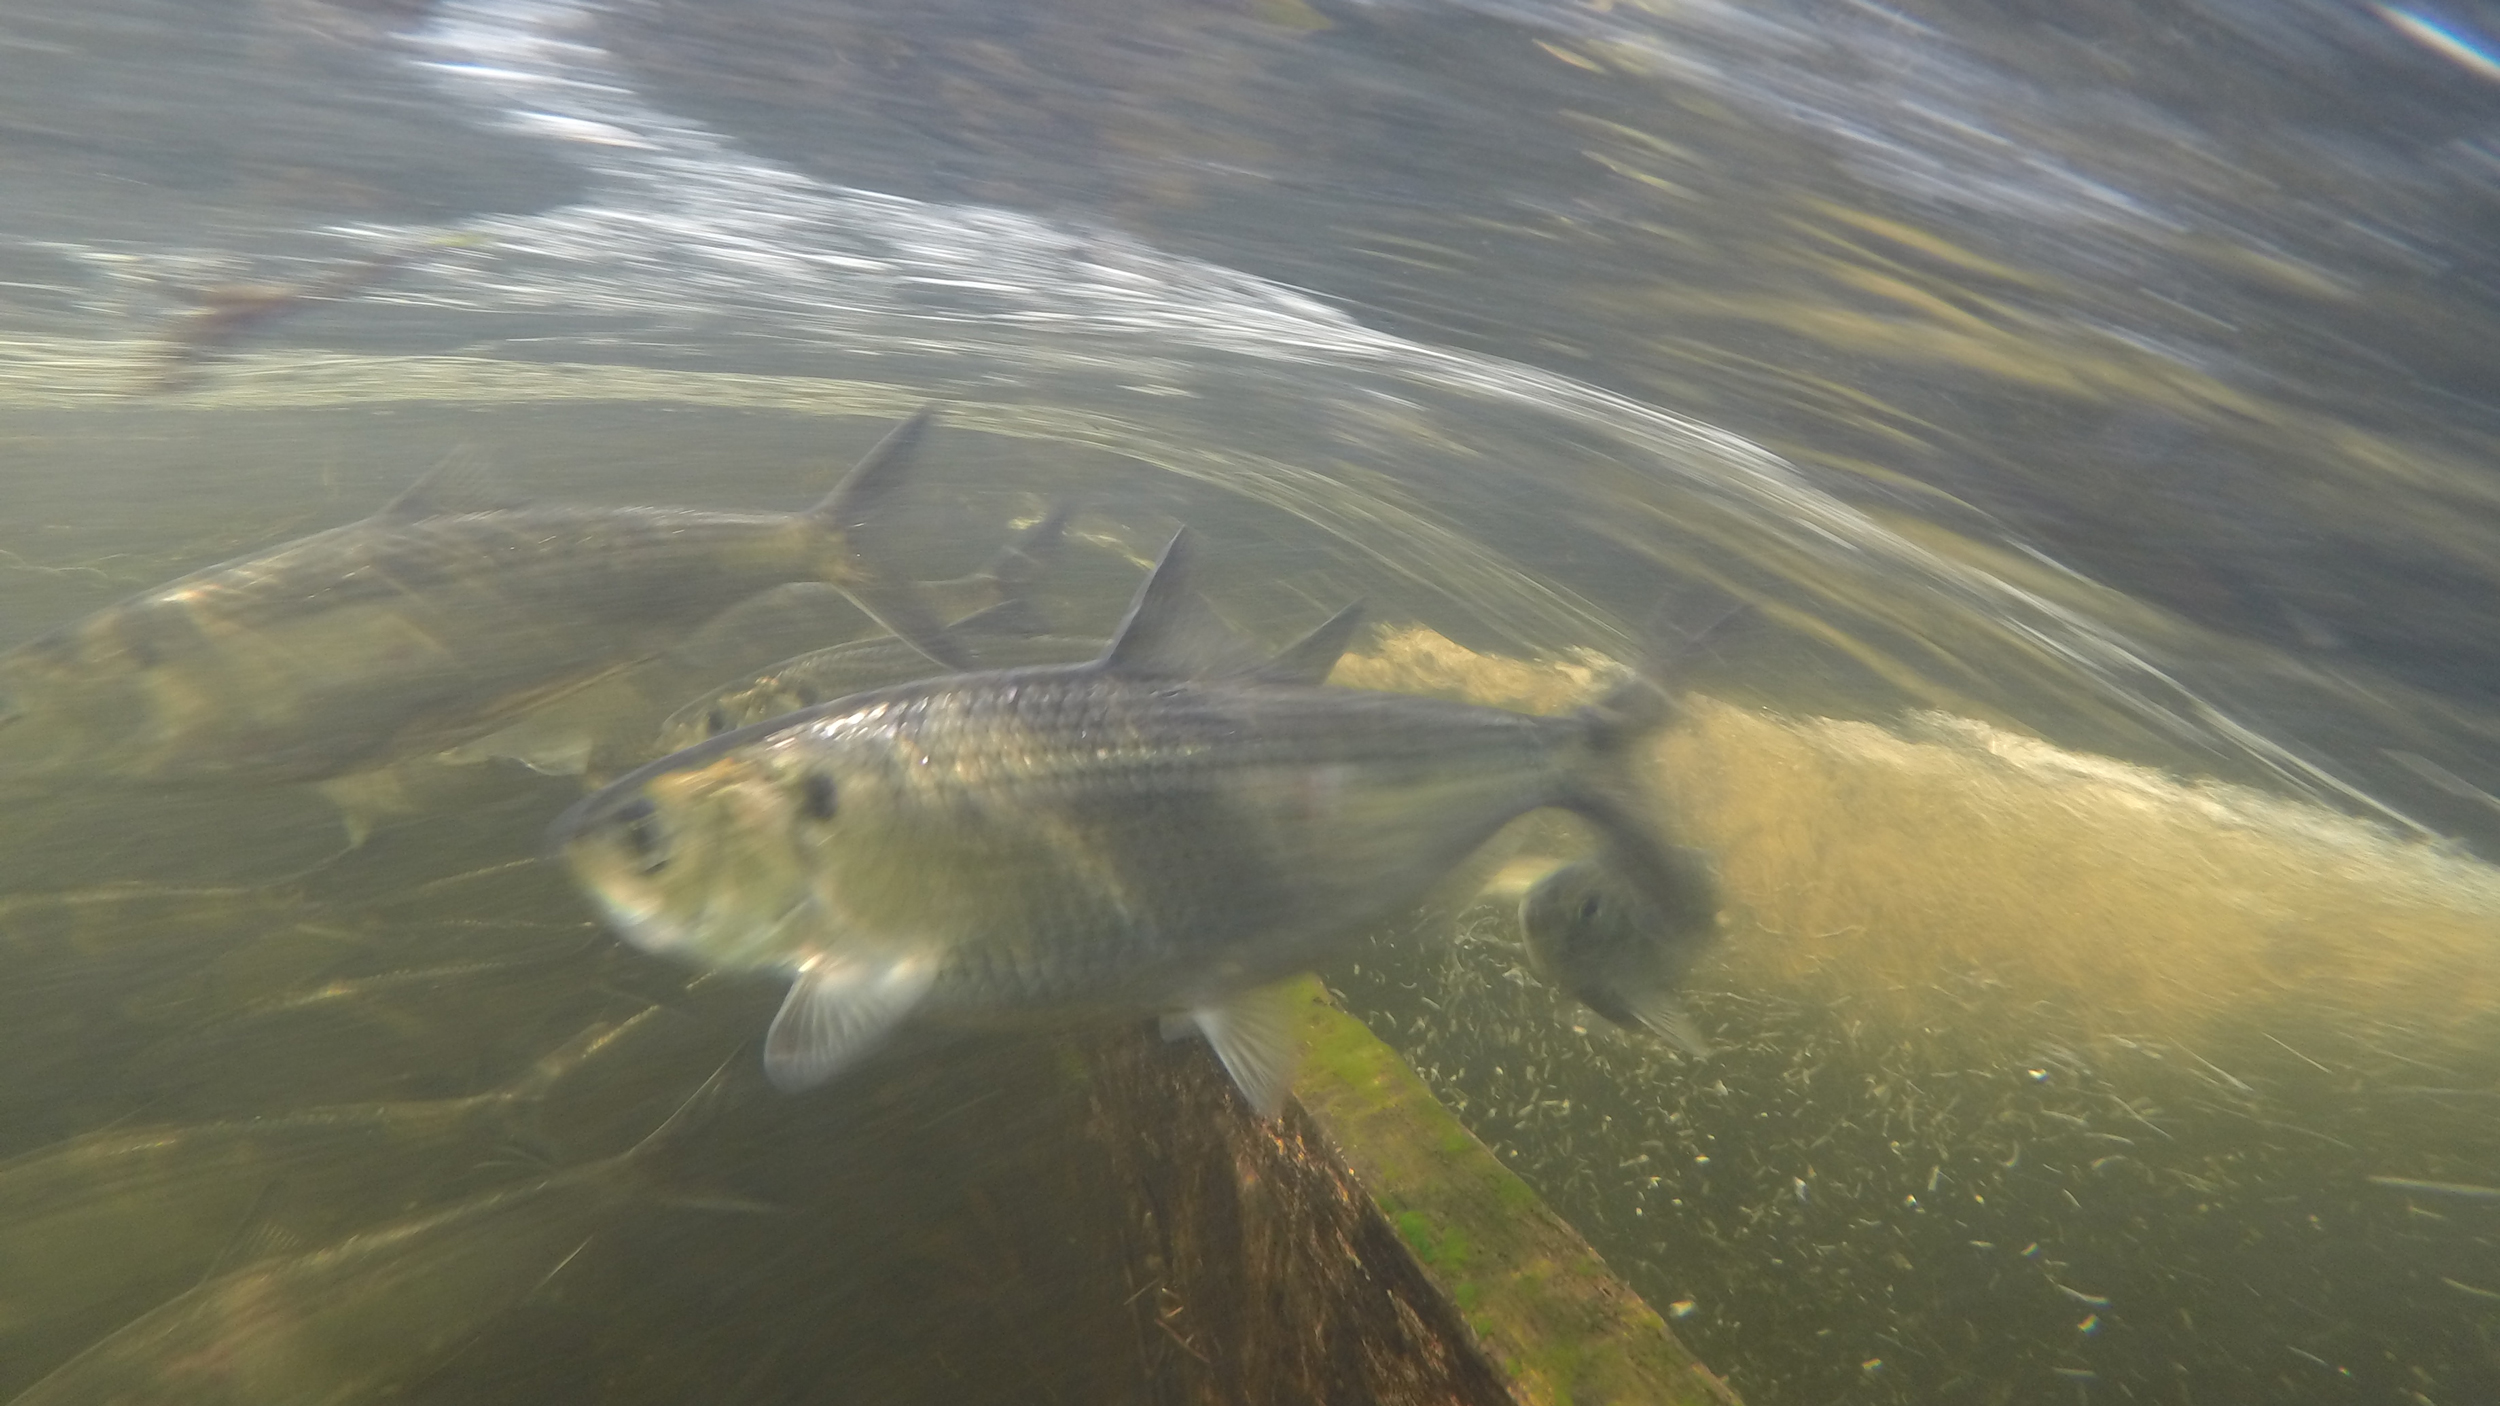 Blueback herring surmounting a weir in the Moulson Pond Fishway, Eightmile River, Lyme, CT. Courtesy of Connecticut Department of Energy and Environmental Protection